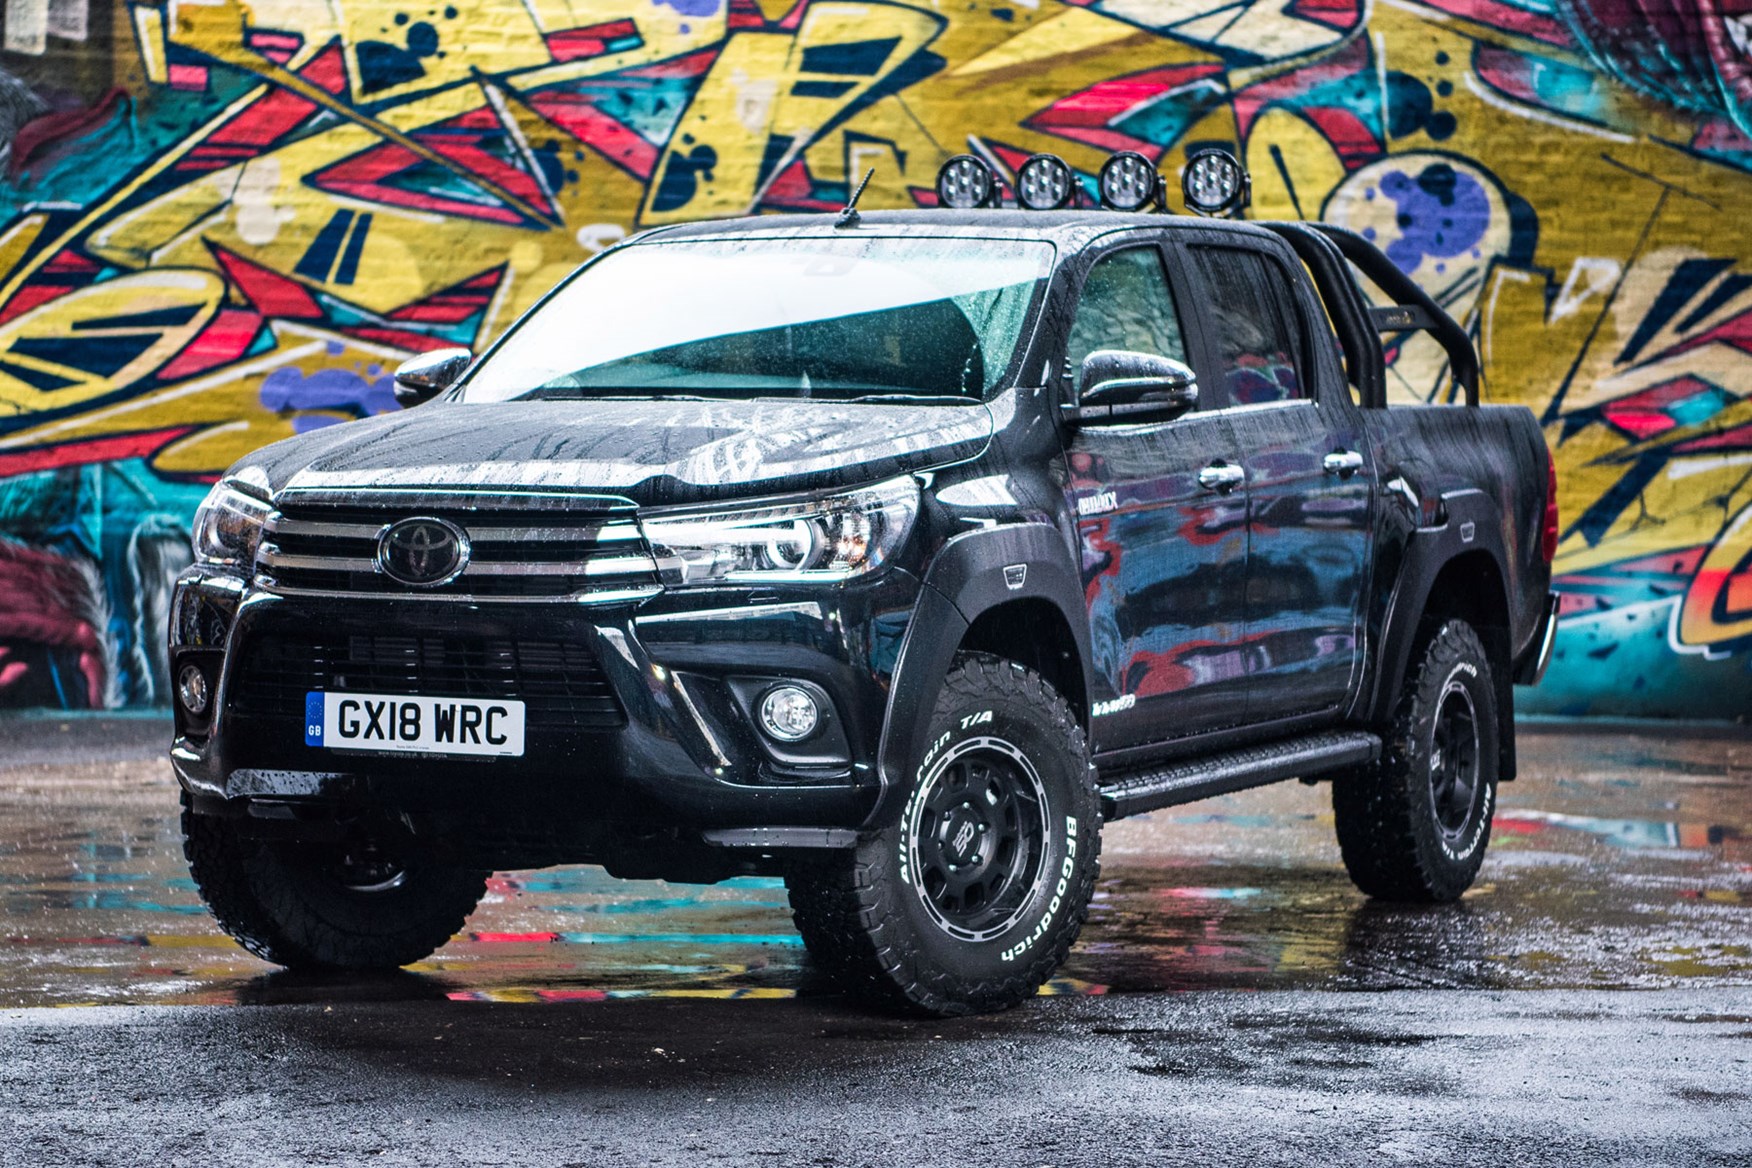 The Toyota Hilux Champ Is the Utility UTV We Need